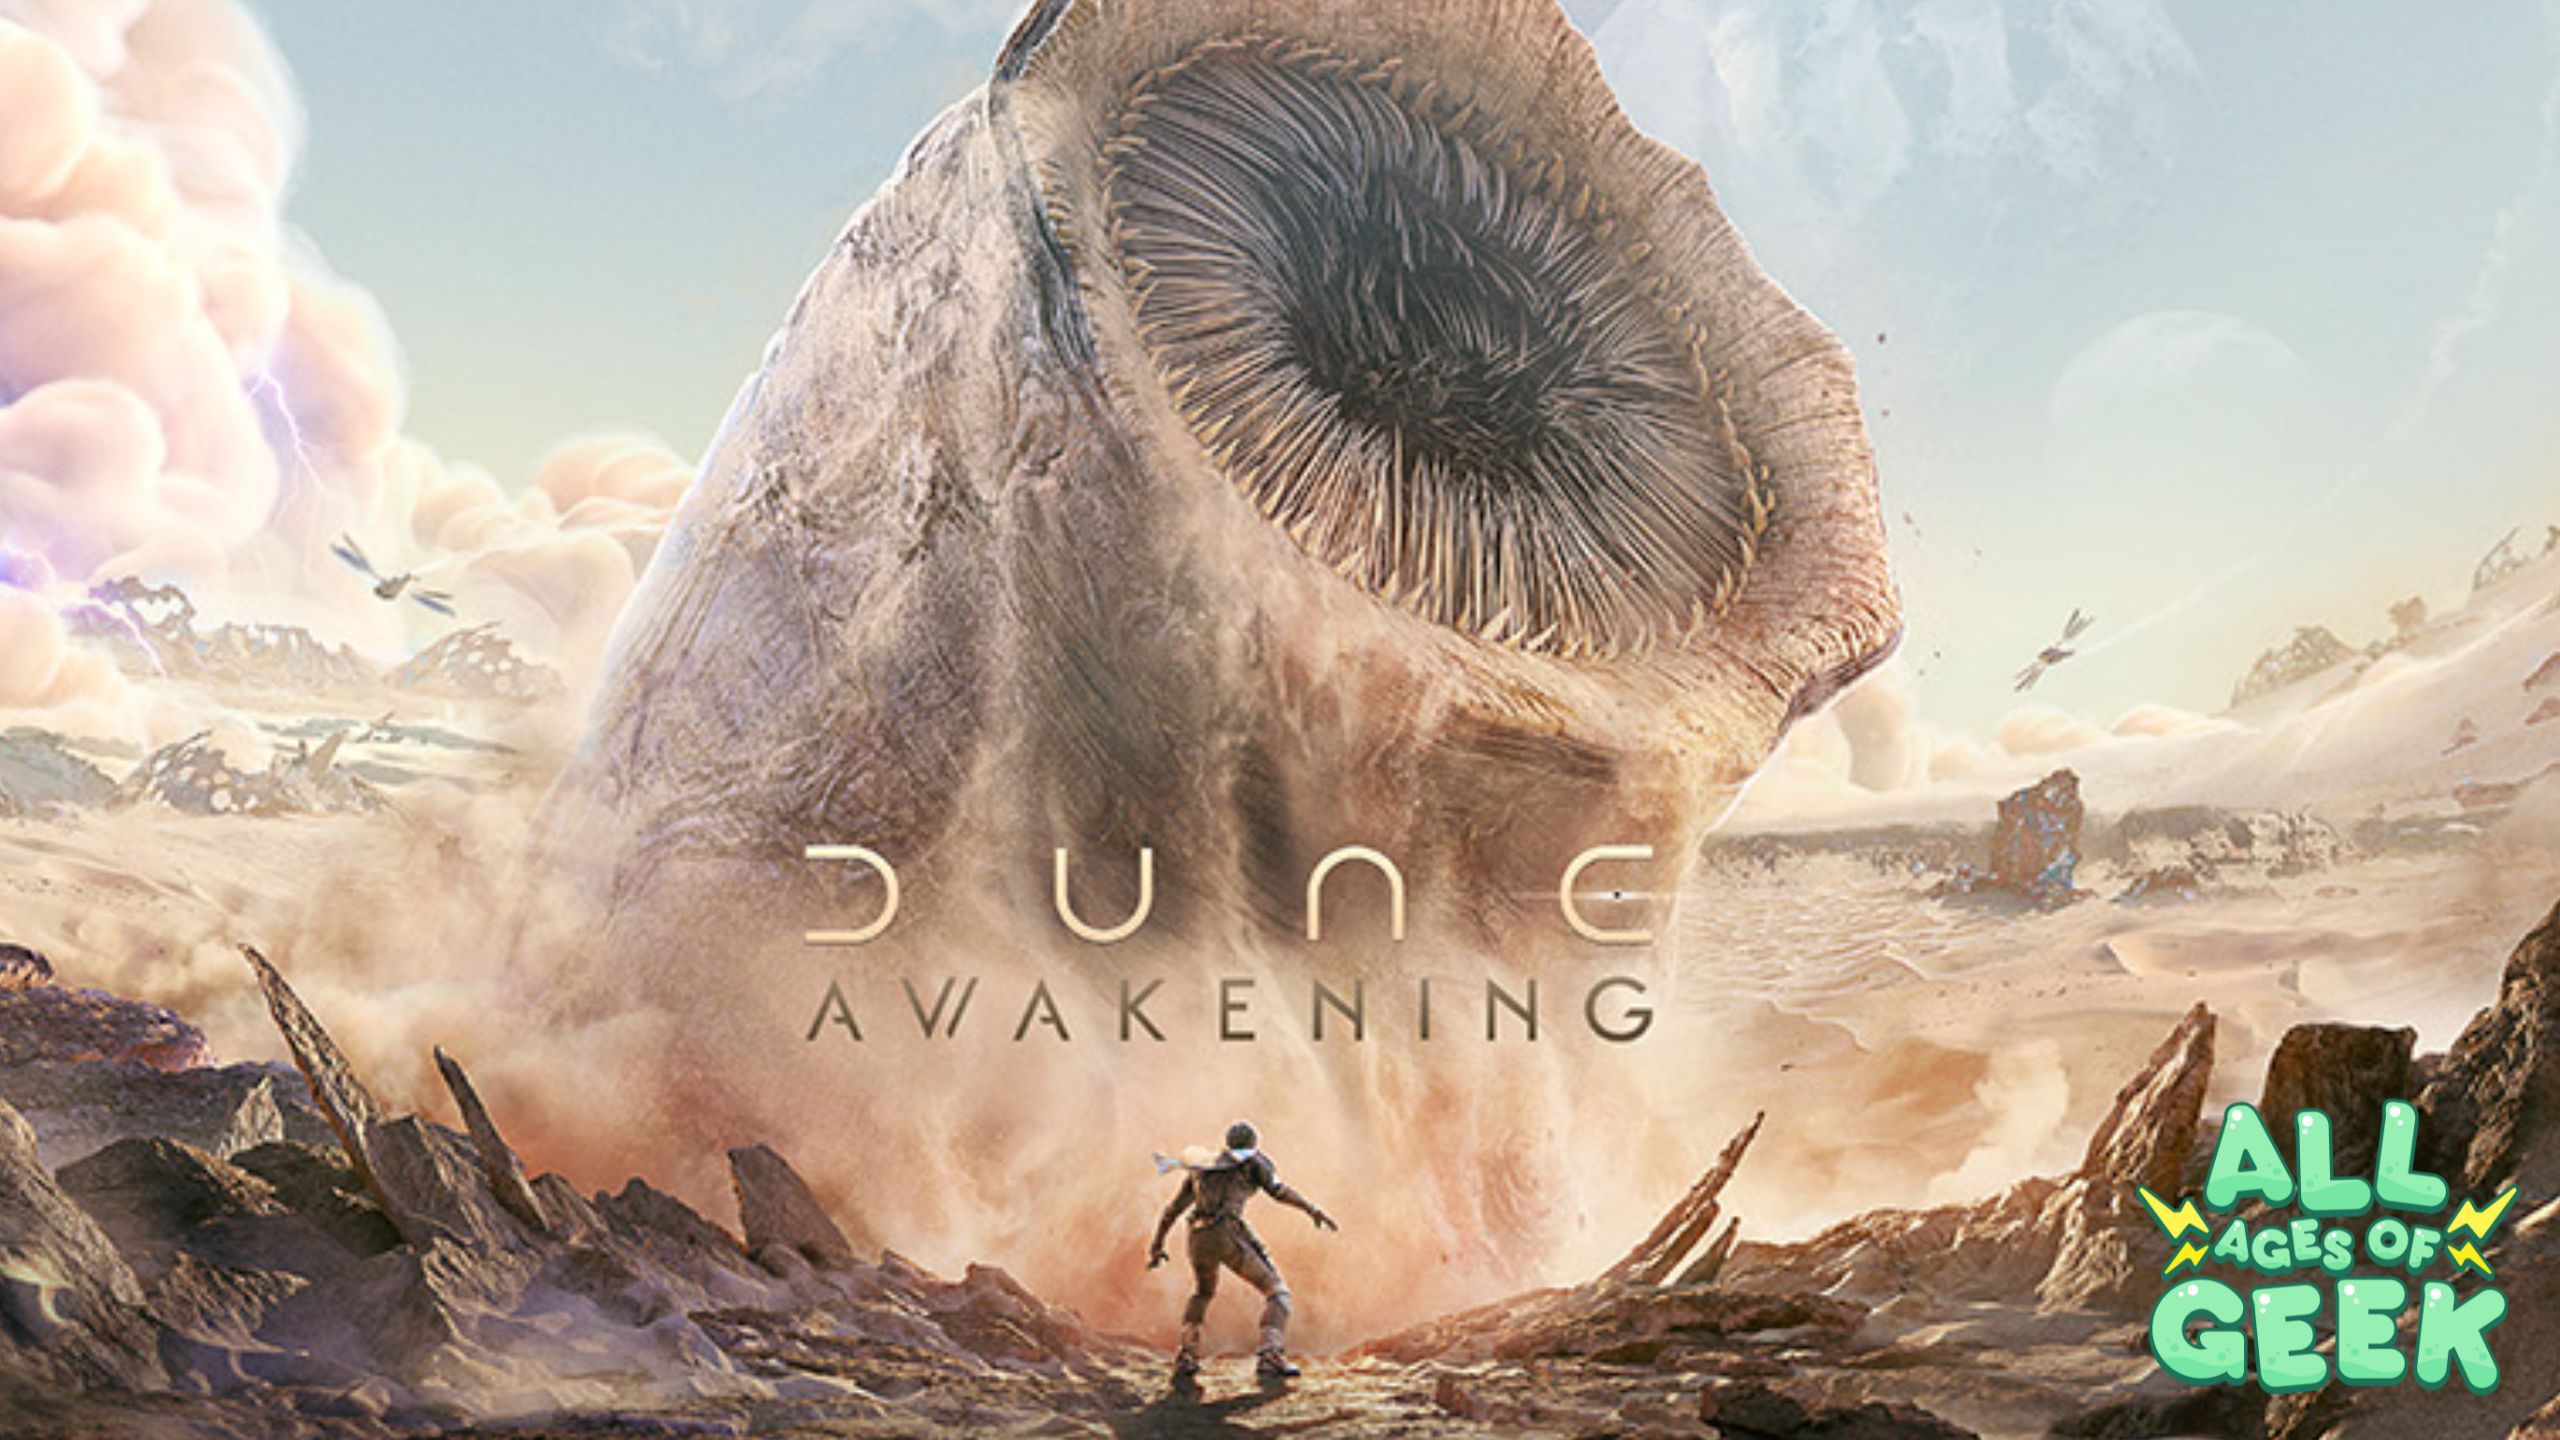 Dune: Awakening," featuring a large sandworm emerging from the desert sands of Arrakis. In the foreground, a lone character in a survival suit stands facing the massive creature. The sky above is filled with swirling clouds and lightning, emphasizing the harsh environment. The logo for "Dune: Awakening" is prominently displayed in the center, with the All Ages of Geek logo in the bottom right corner.